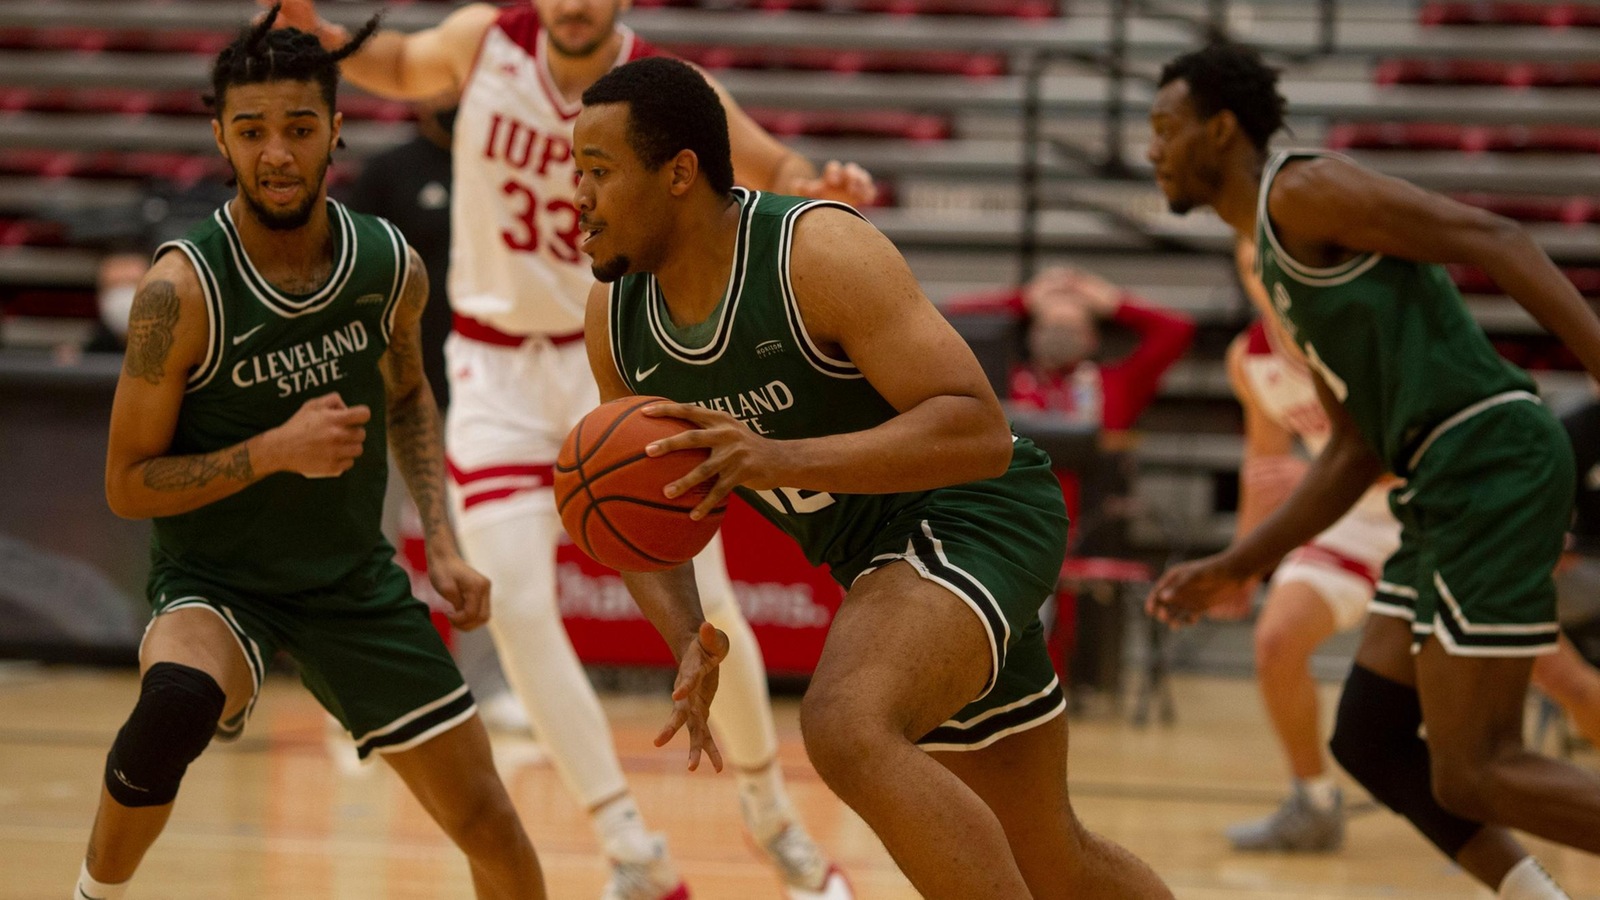 Vikings Earn Win at IUPUI, Now 5-0 in League Play